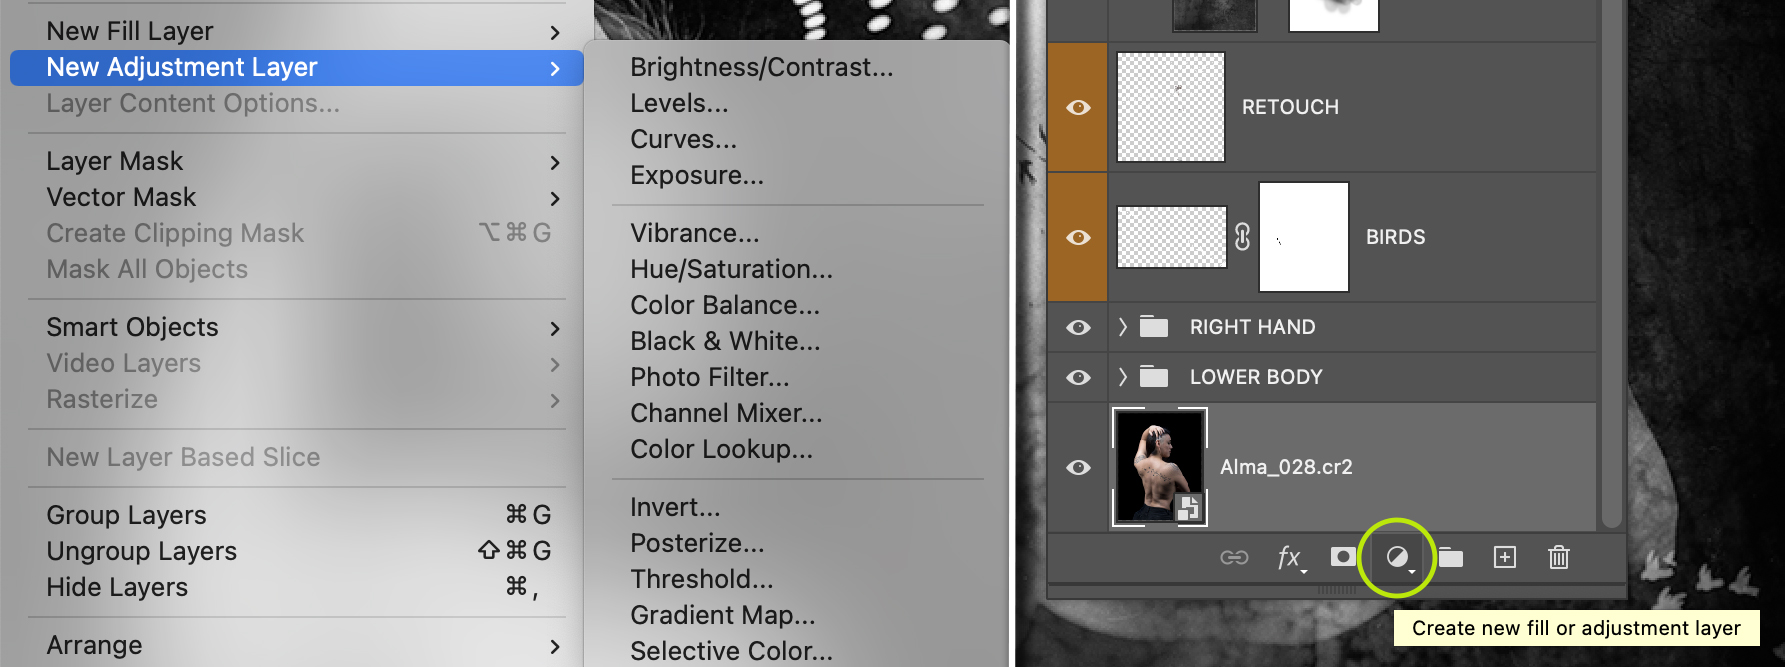 The New Adjustment Layer menu options and the shortcut on the Layers panel.